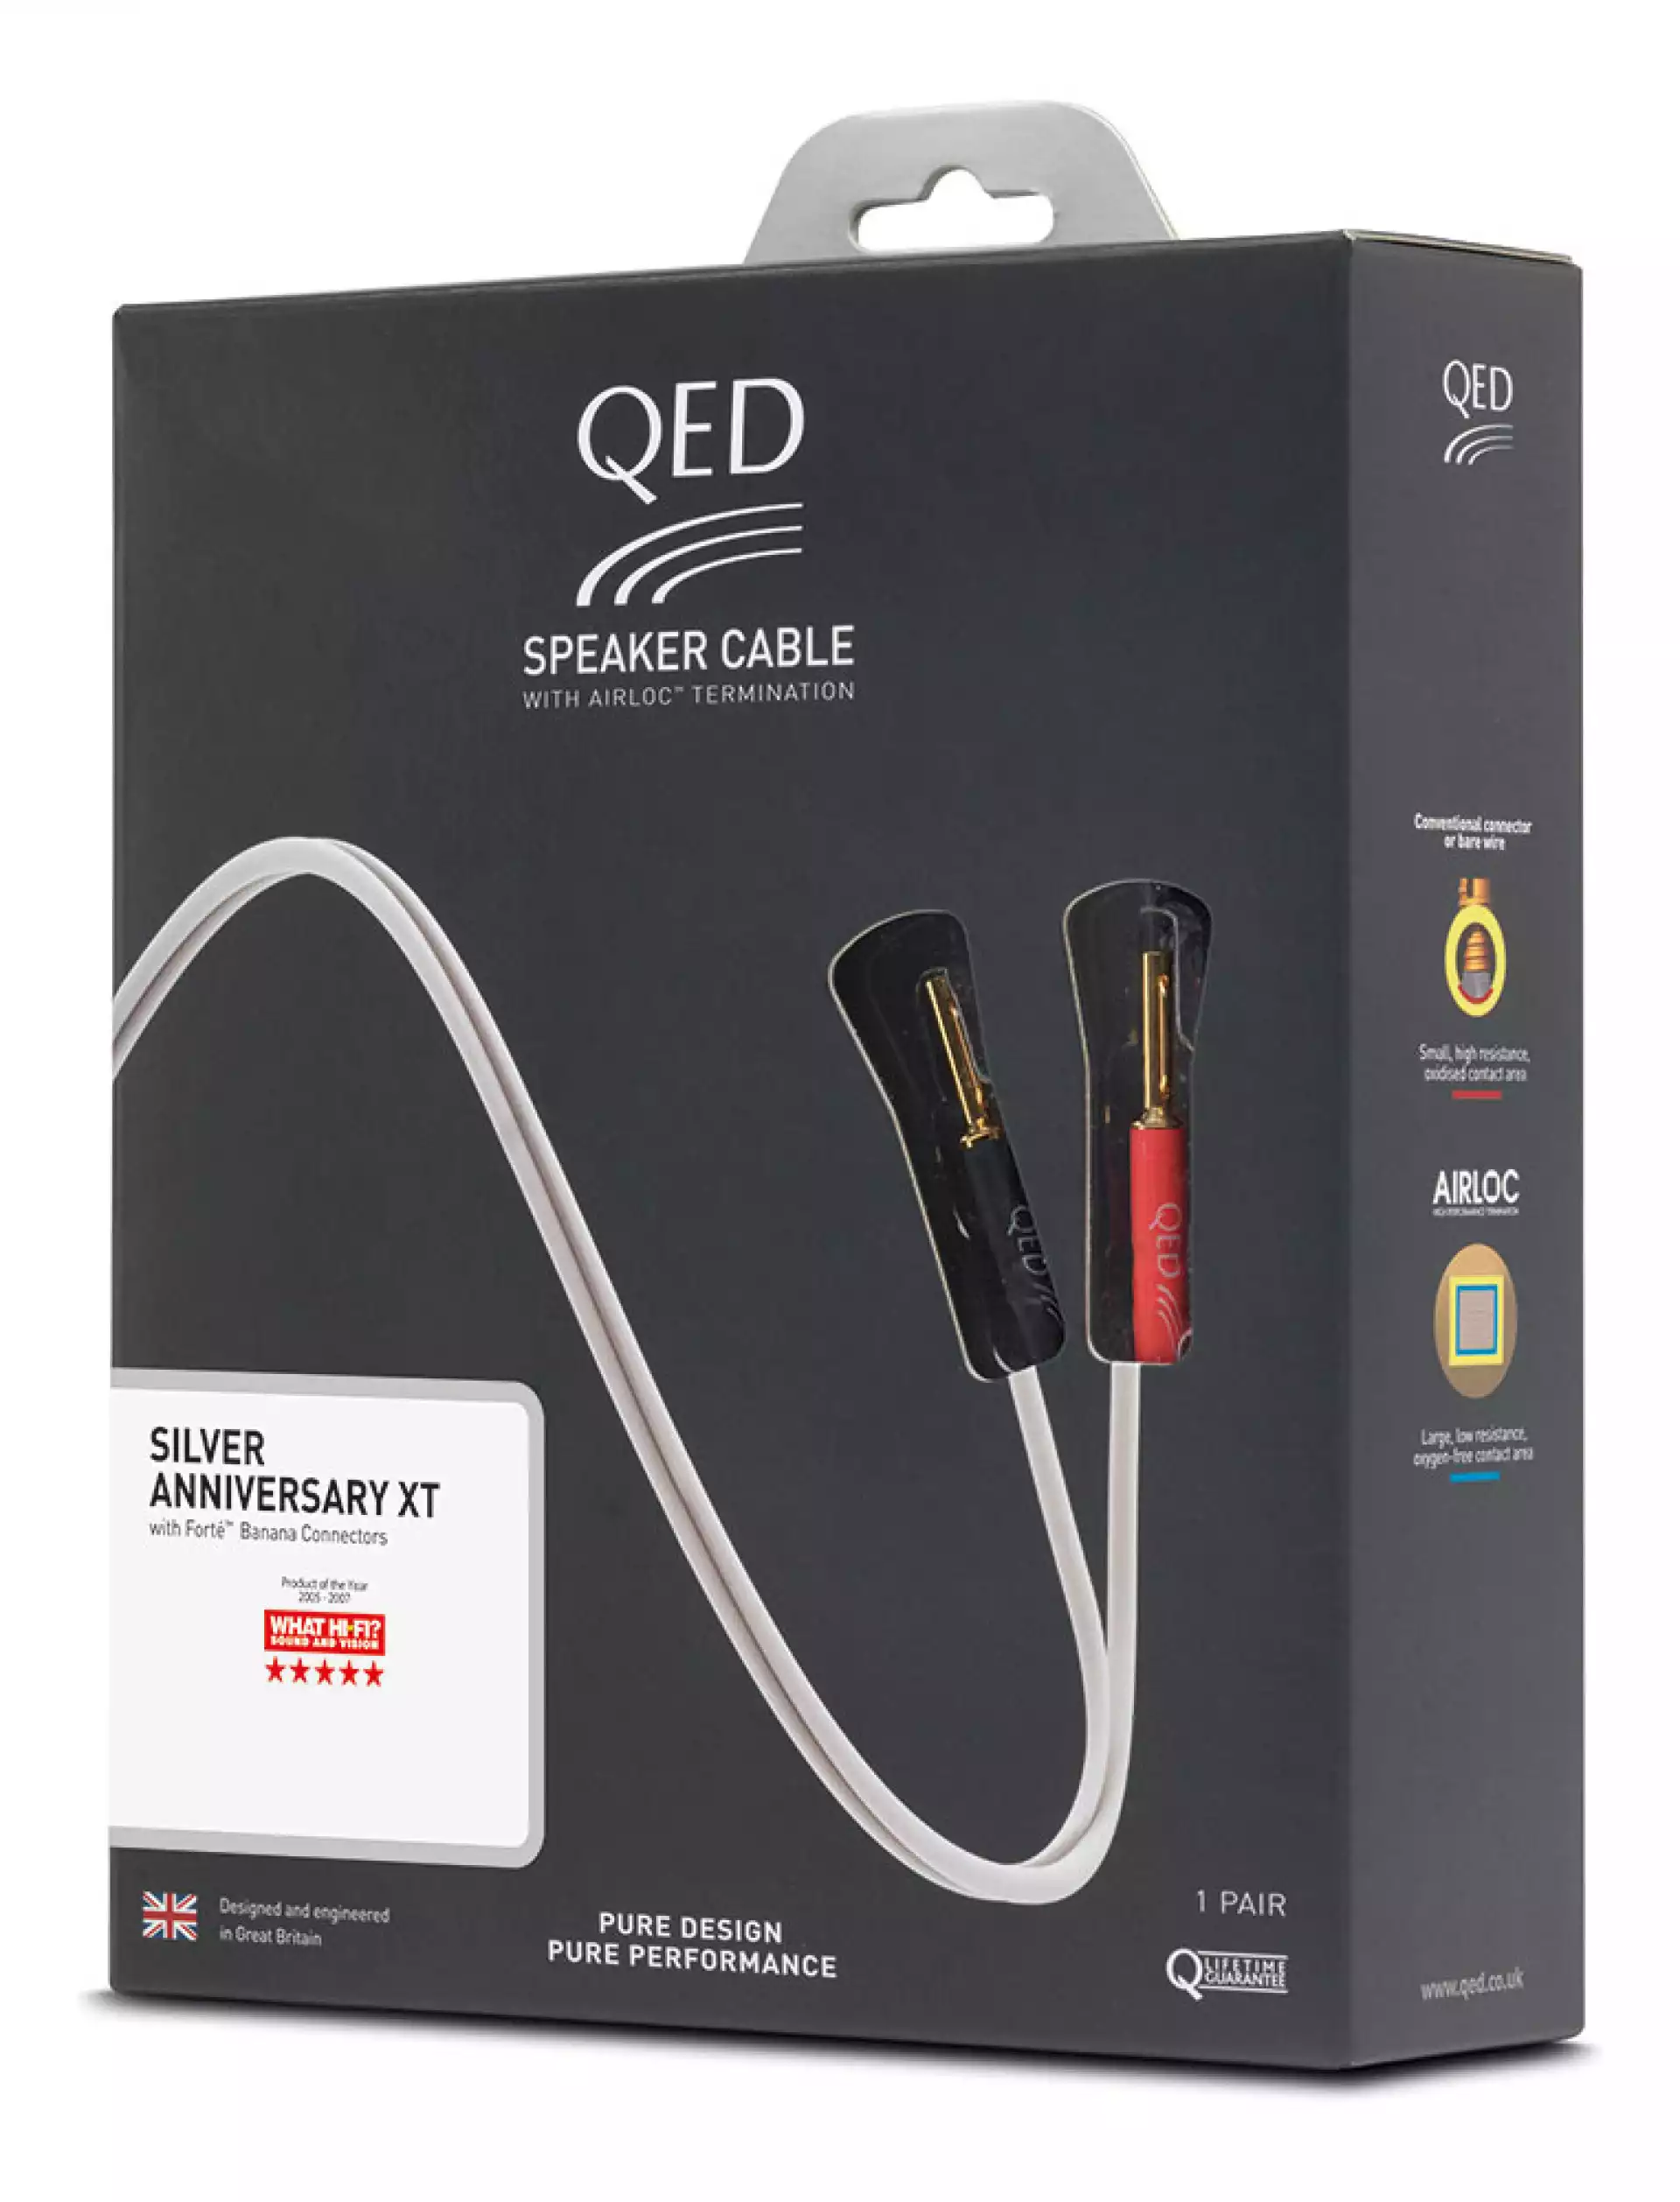 QED SAXT SPEAKER CABLE 3M